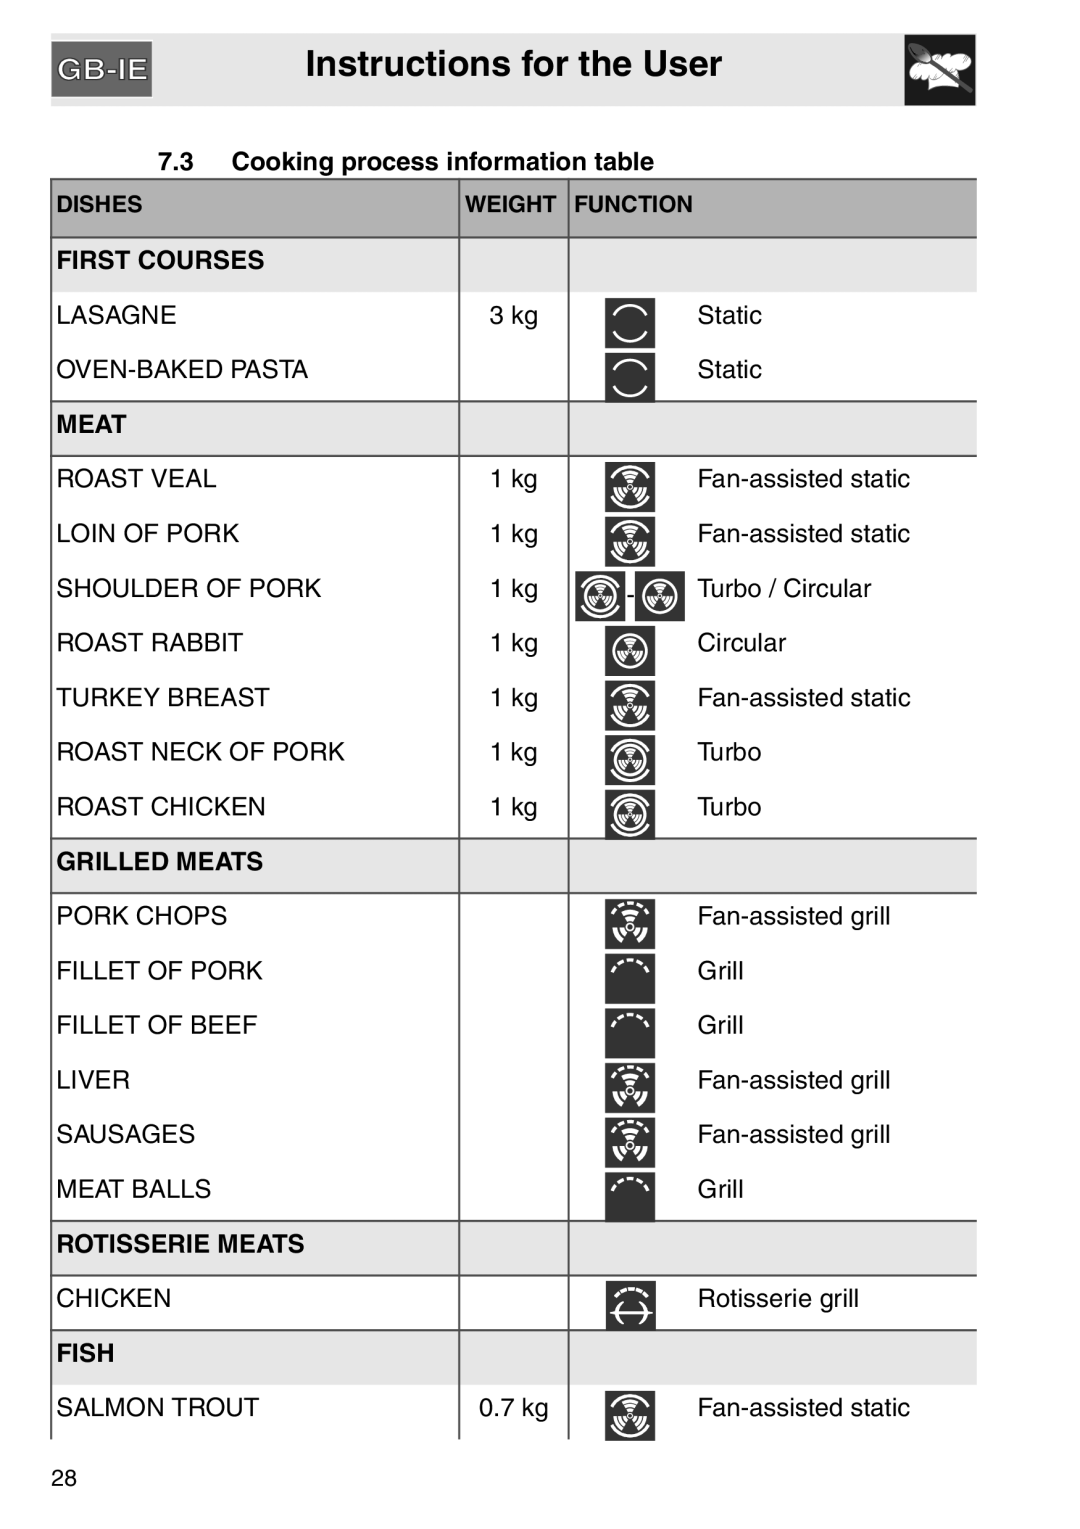 Smeg SA561X-9 Cooking process information table, First Courses, Grilled Meats, Rotisserie Meats, Fish 